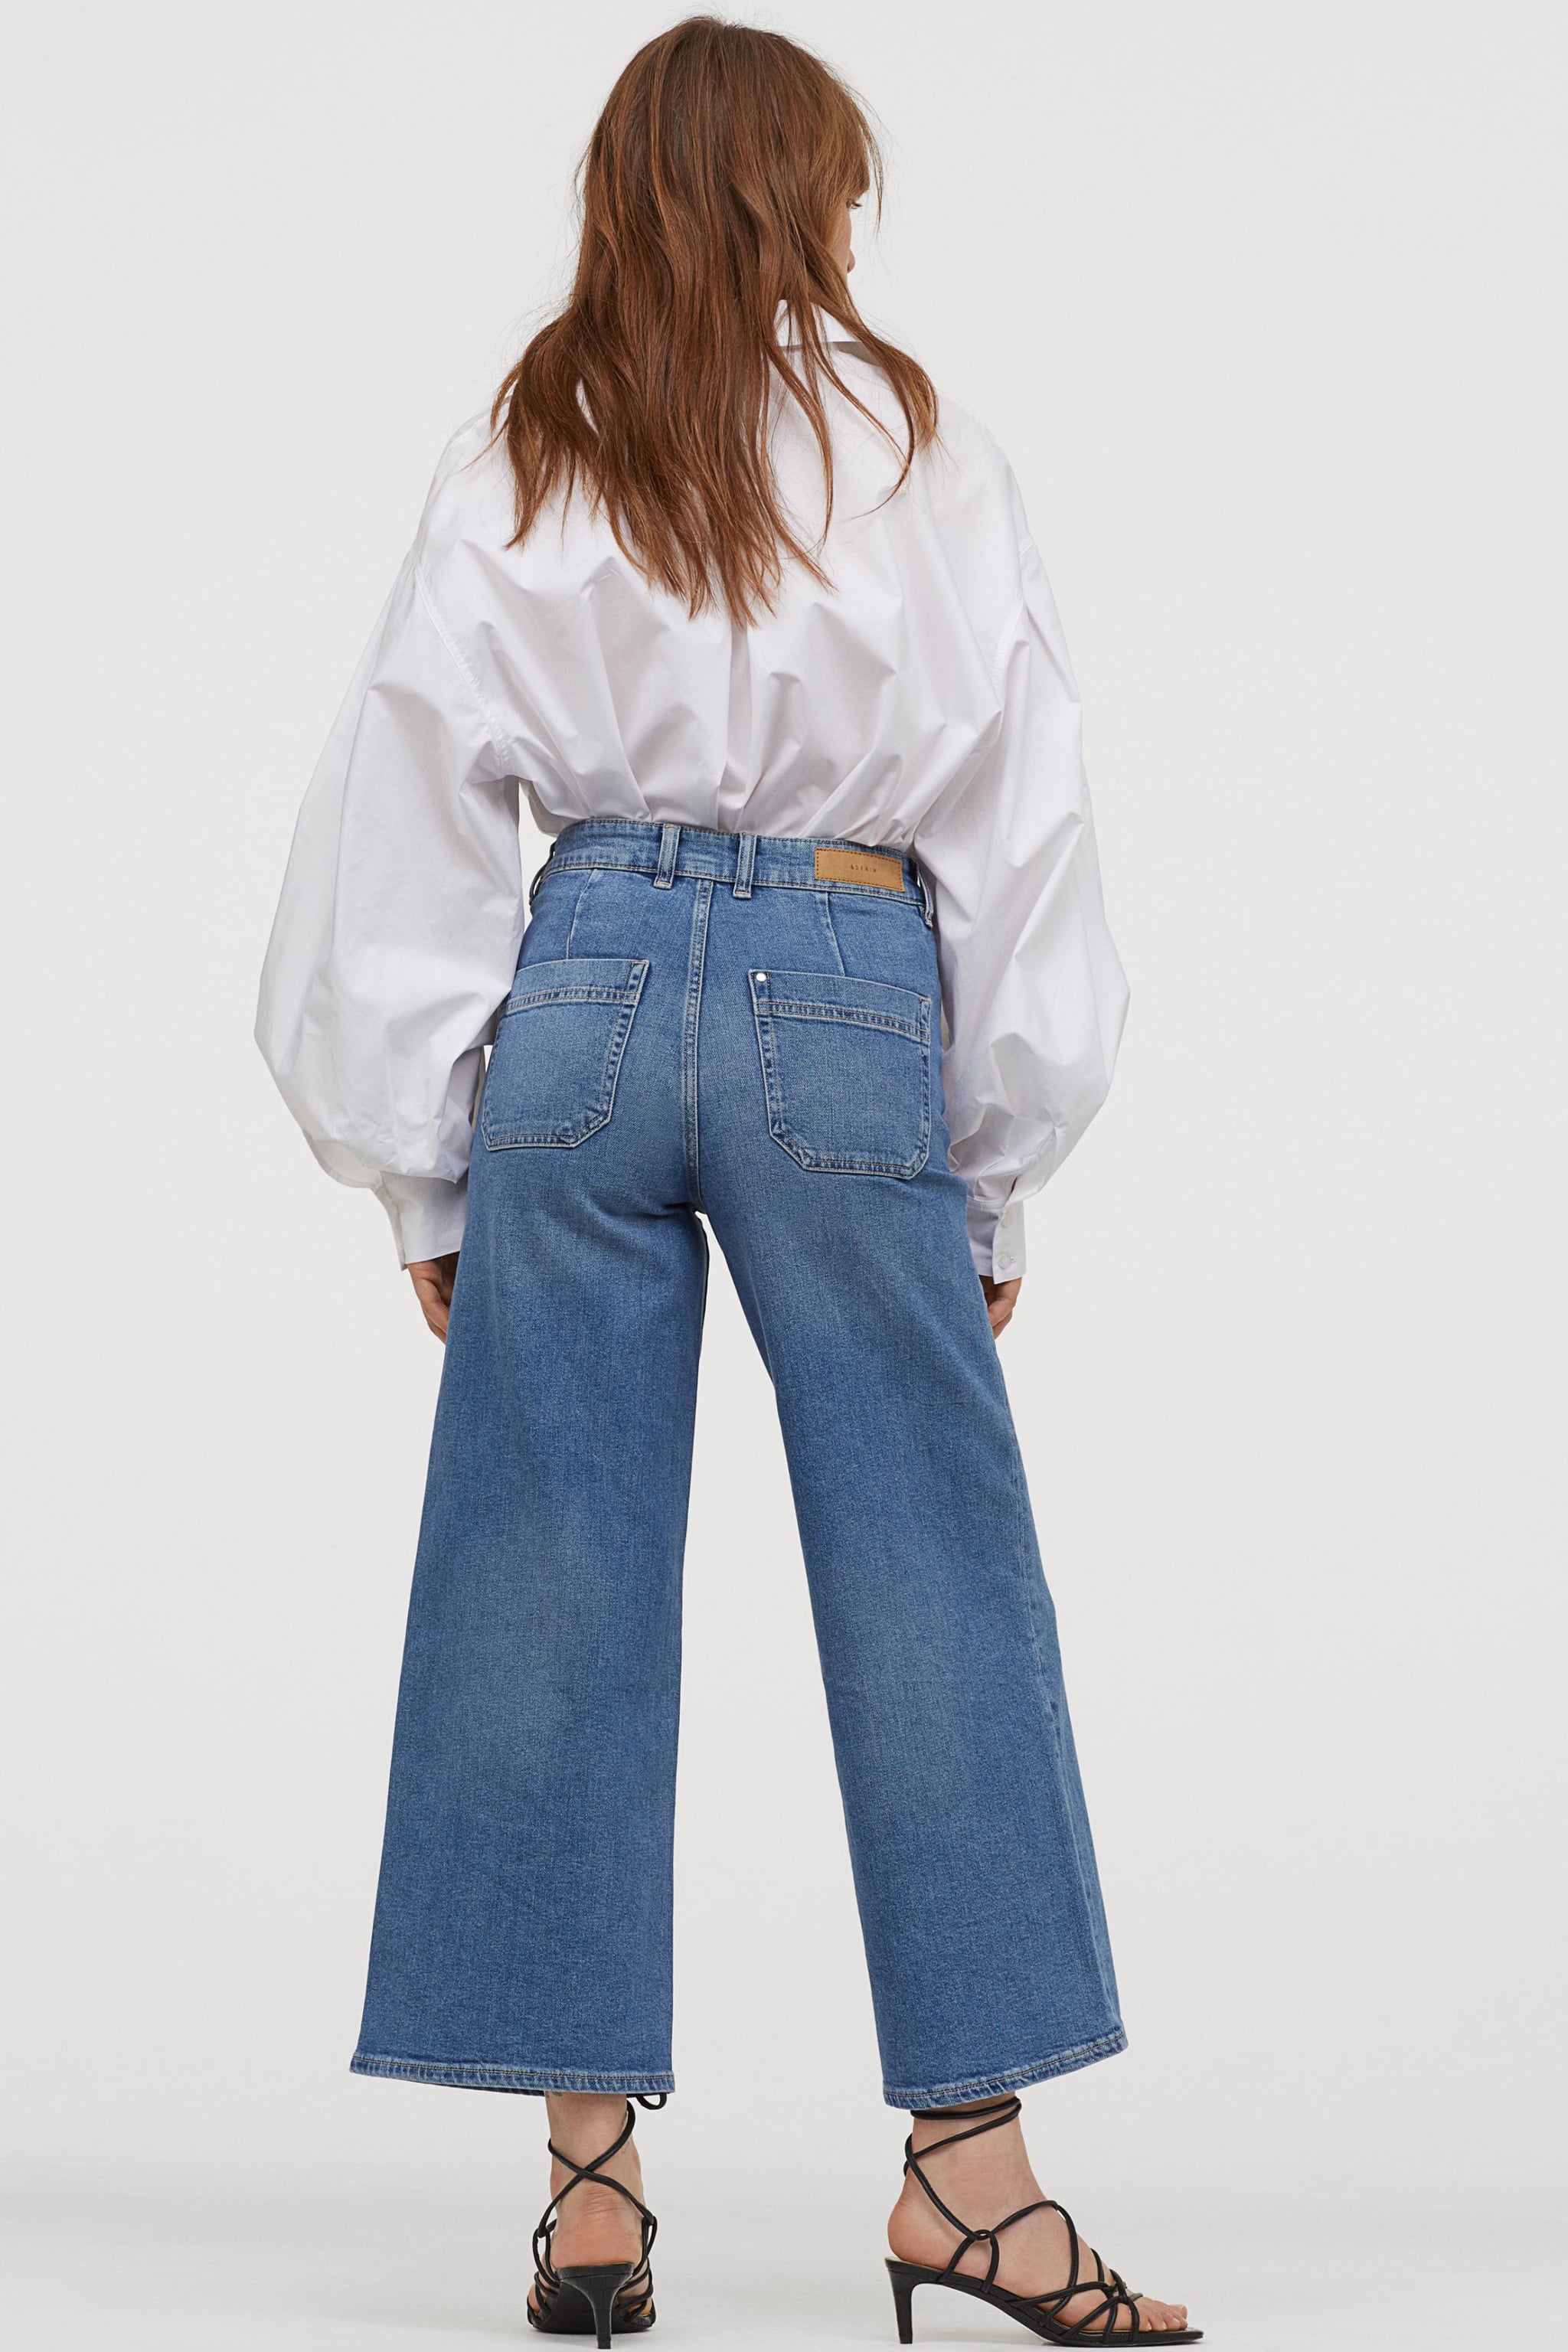 culotte high ankle jeans